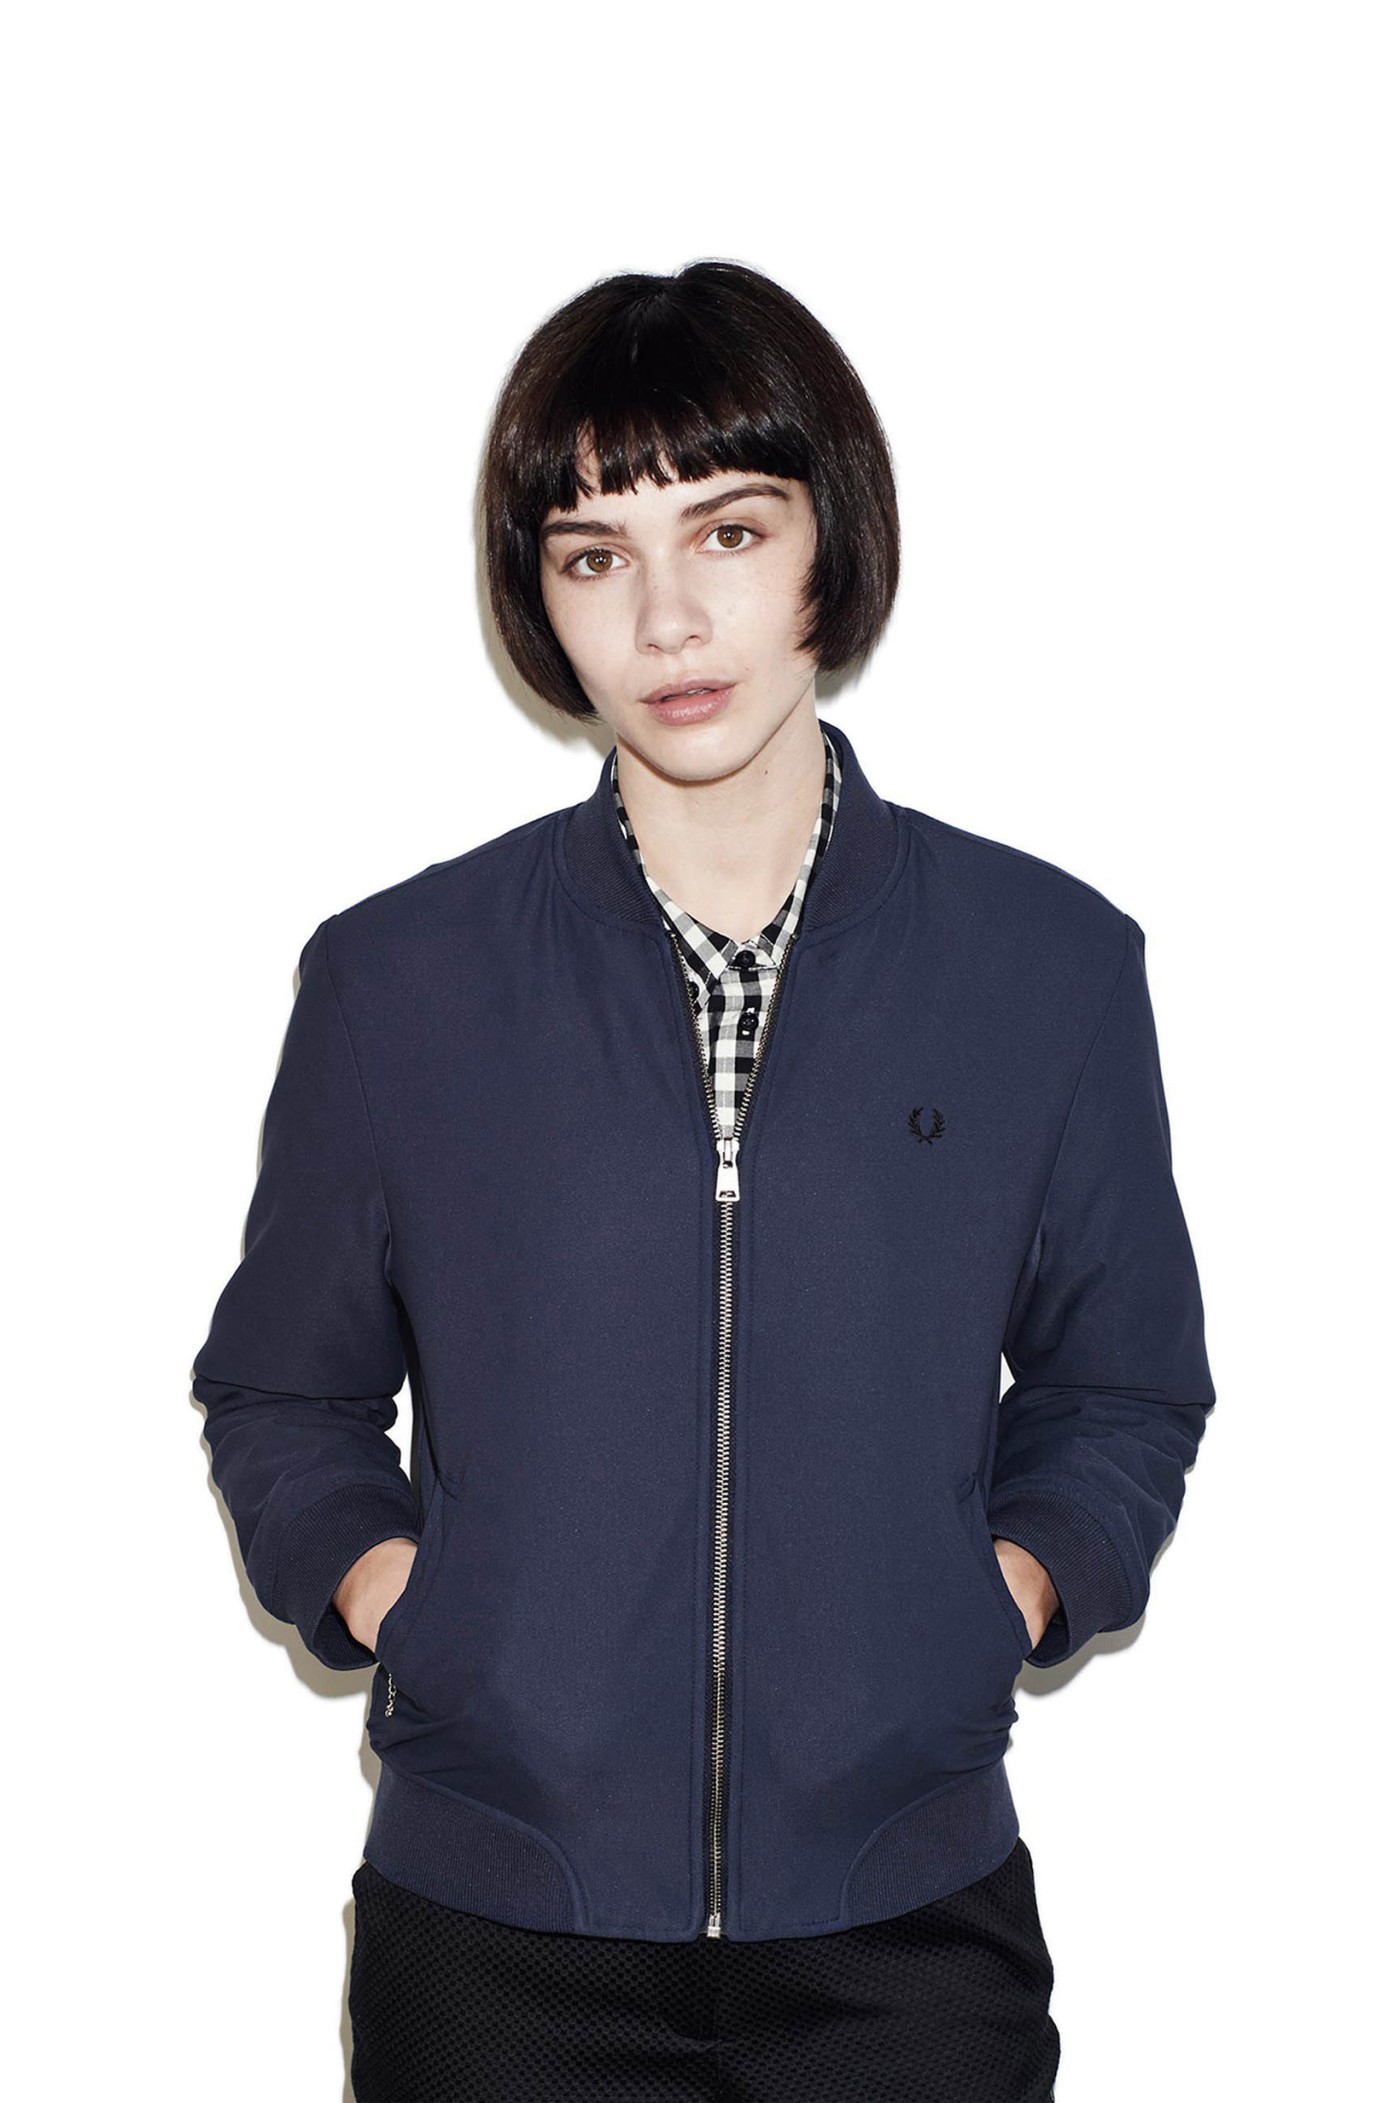 Sale watch: The Fred Perry sale is now on